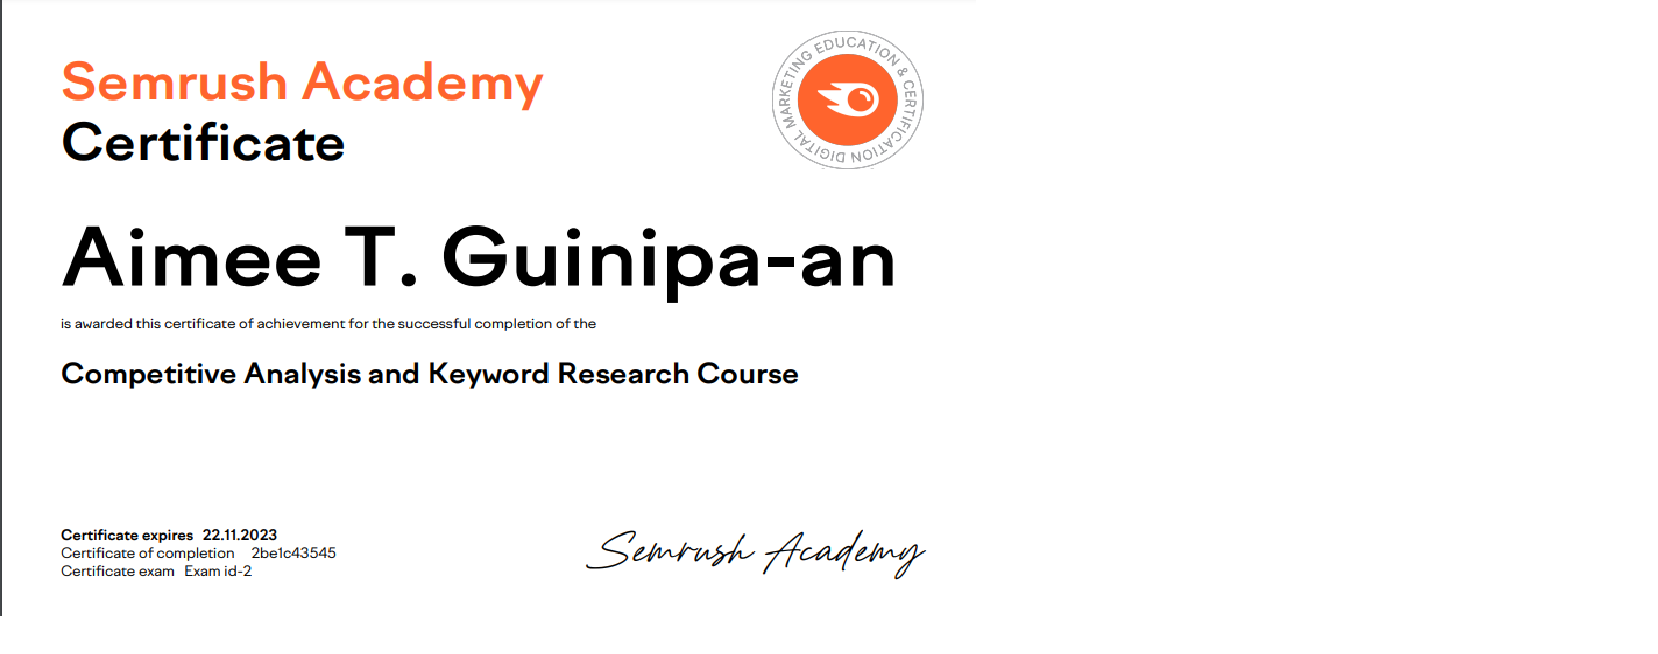 Semrush Academy -Competitive Analysis and Keyword Research Course